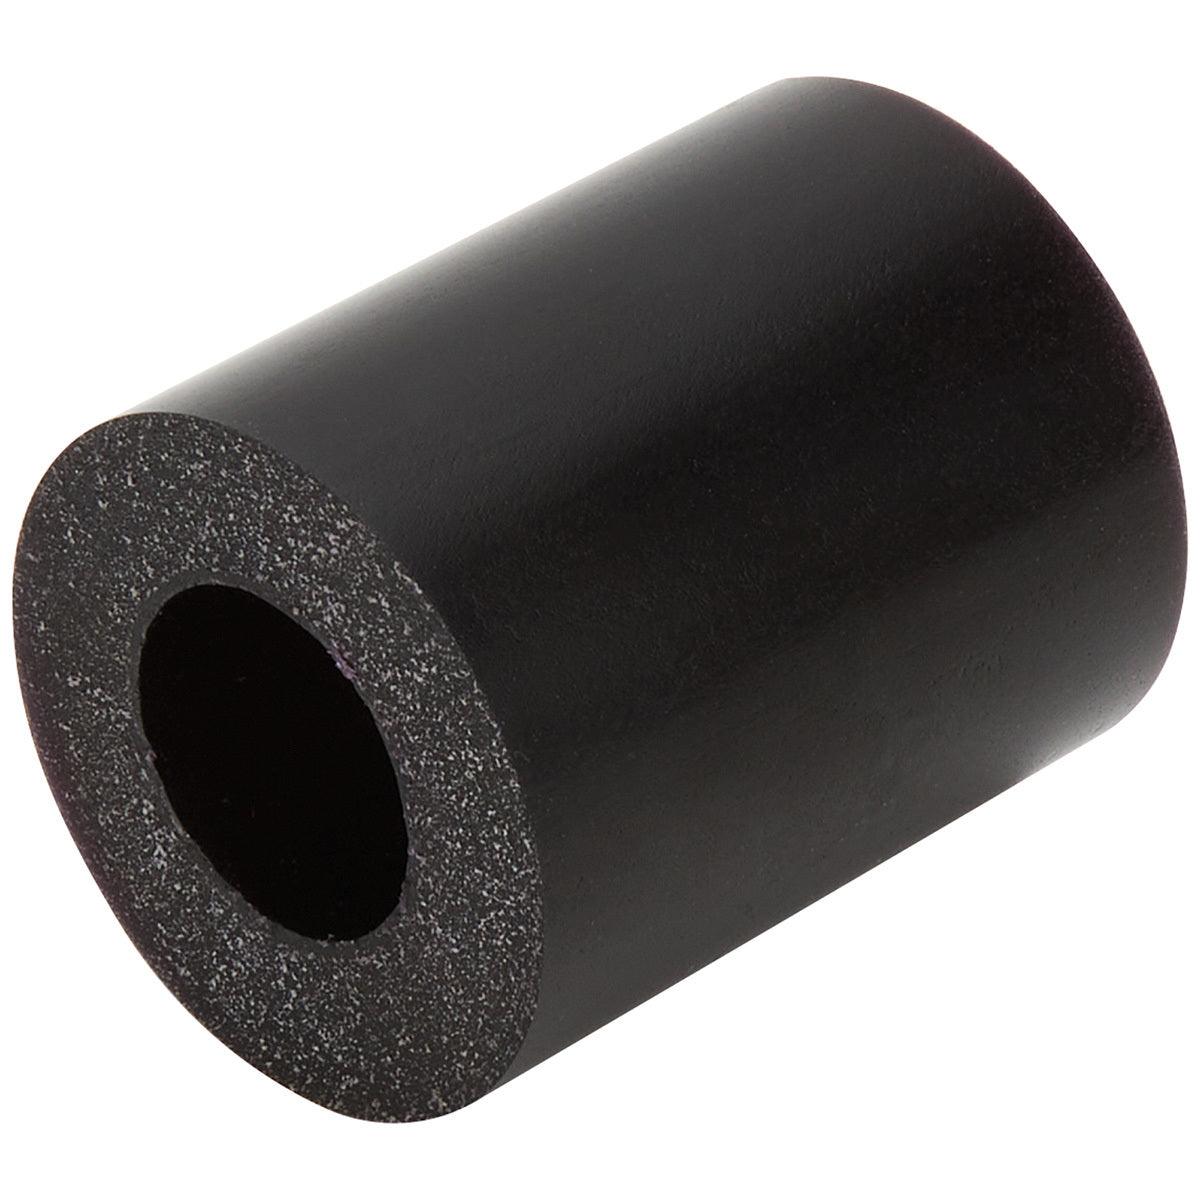 Bushing Insert for ALL56248 40DR Soft - Burlile Performance Products